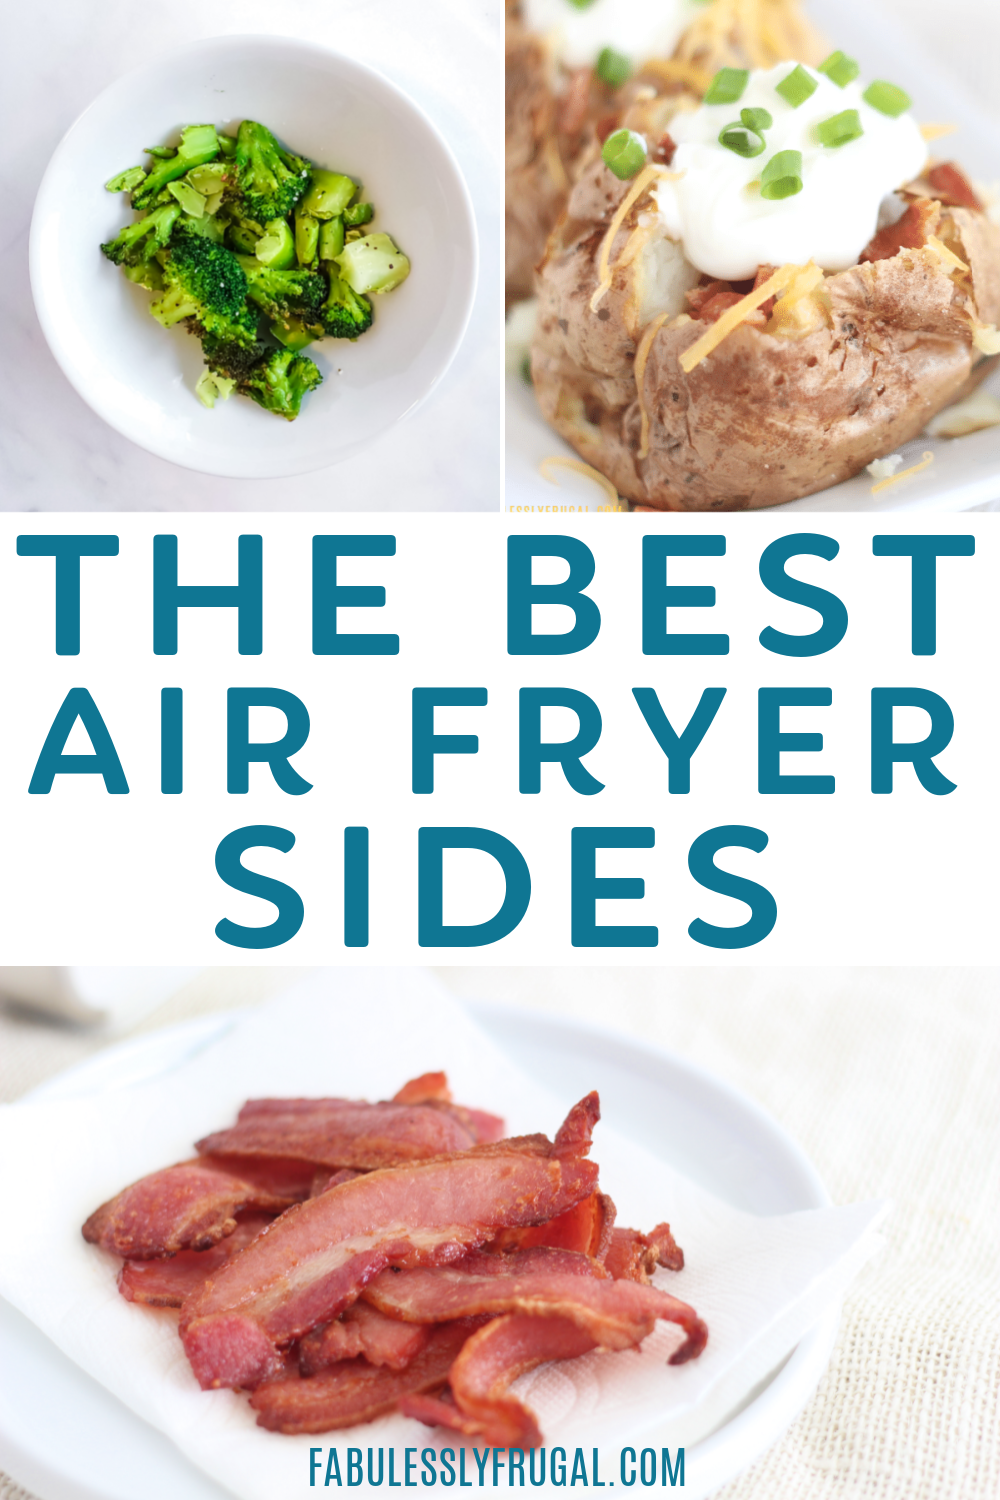 https://fabulesslyfrugal.com/wp-content/uploads/2022/12/65_The-10-Best-Air-Fryer-Recipes-Ever-1-1.png